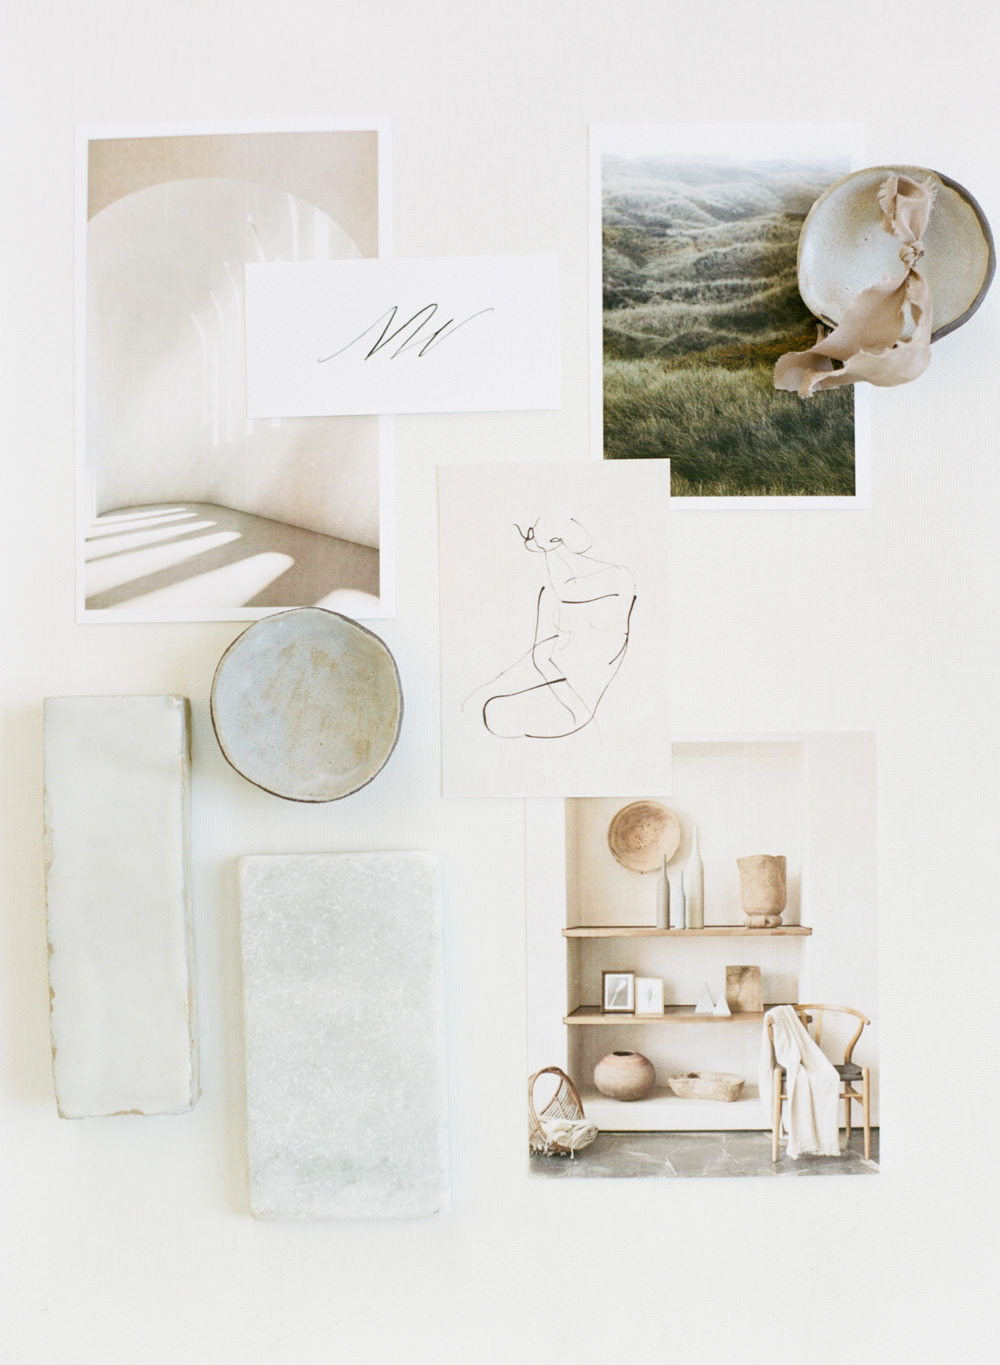 Business Lifestyle + Branding Content Photoshoot for San Fransisco based Designer Natalie Whearley | interiors, inspiration, minimalism, simple, califorina | Anna Peters, Seattle Wedding and Lifestyle Photography